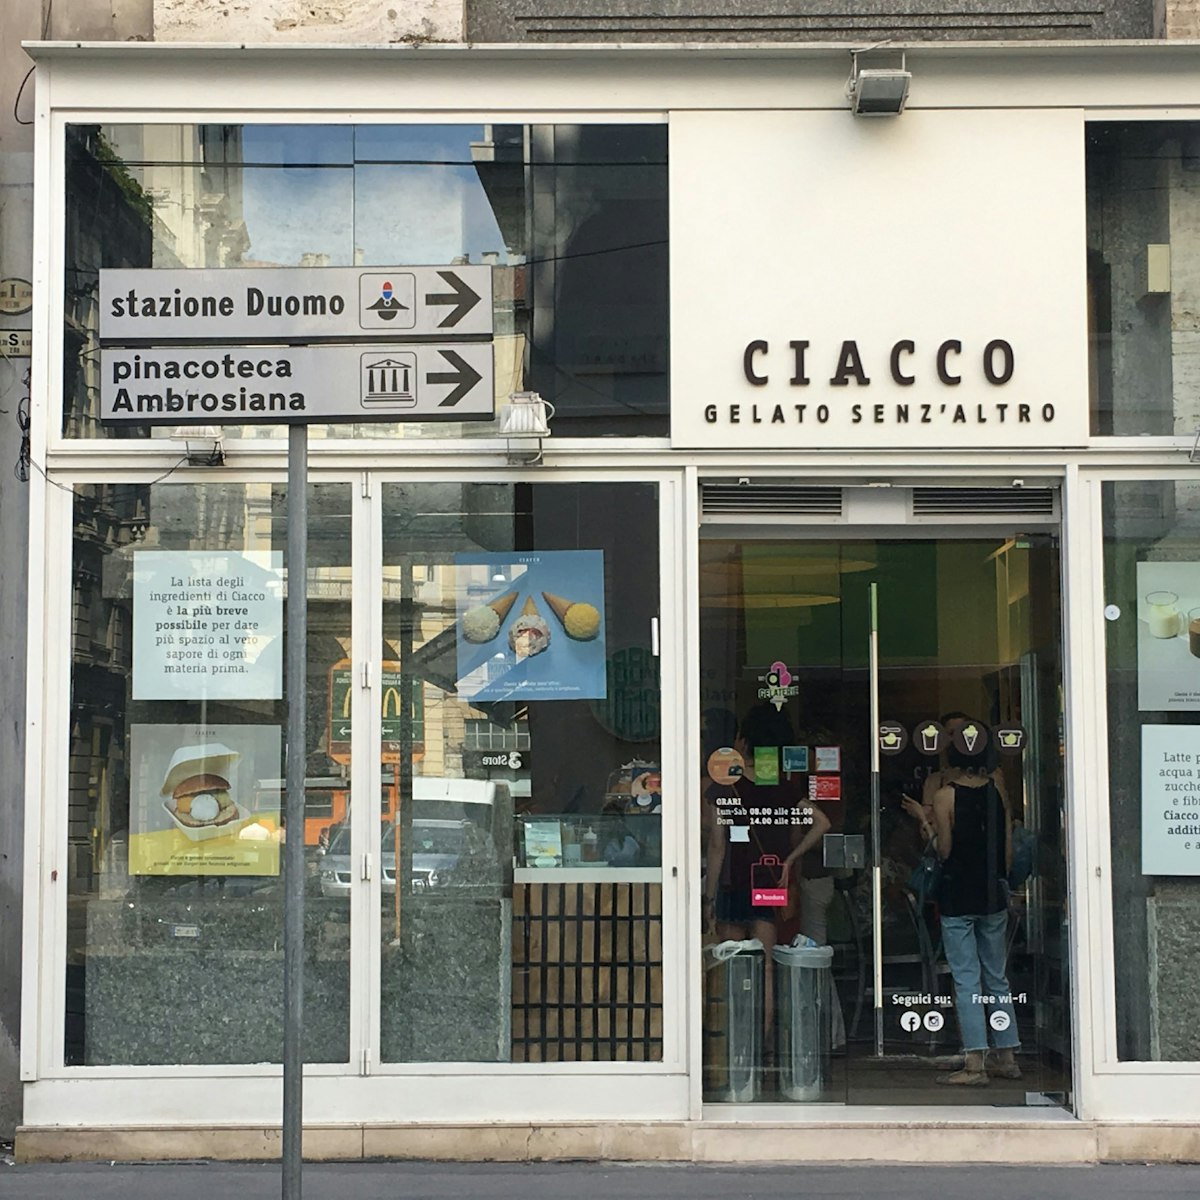 The Ciacco gelateria shop front